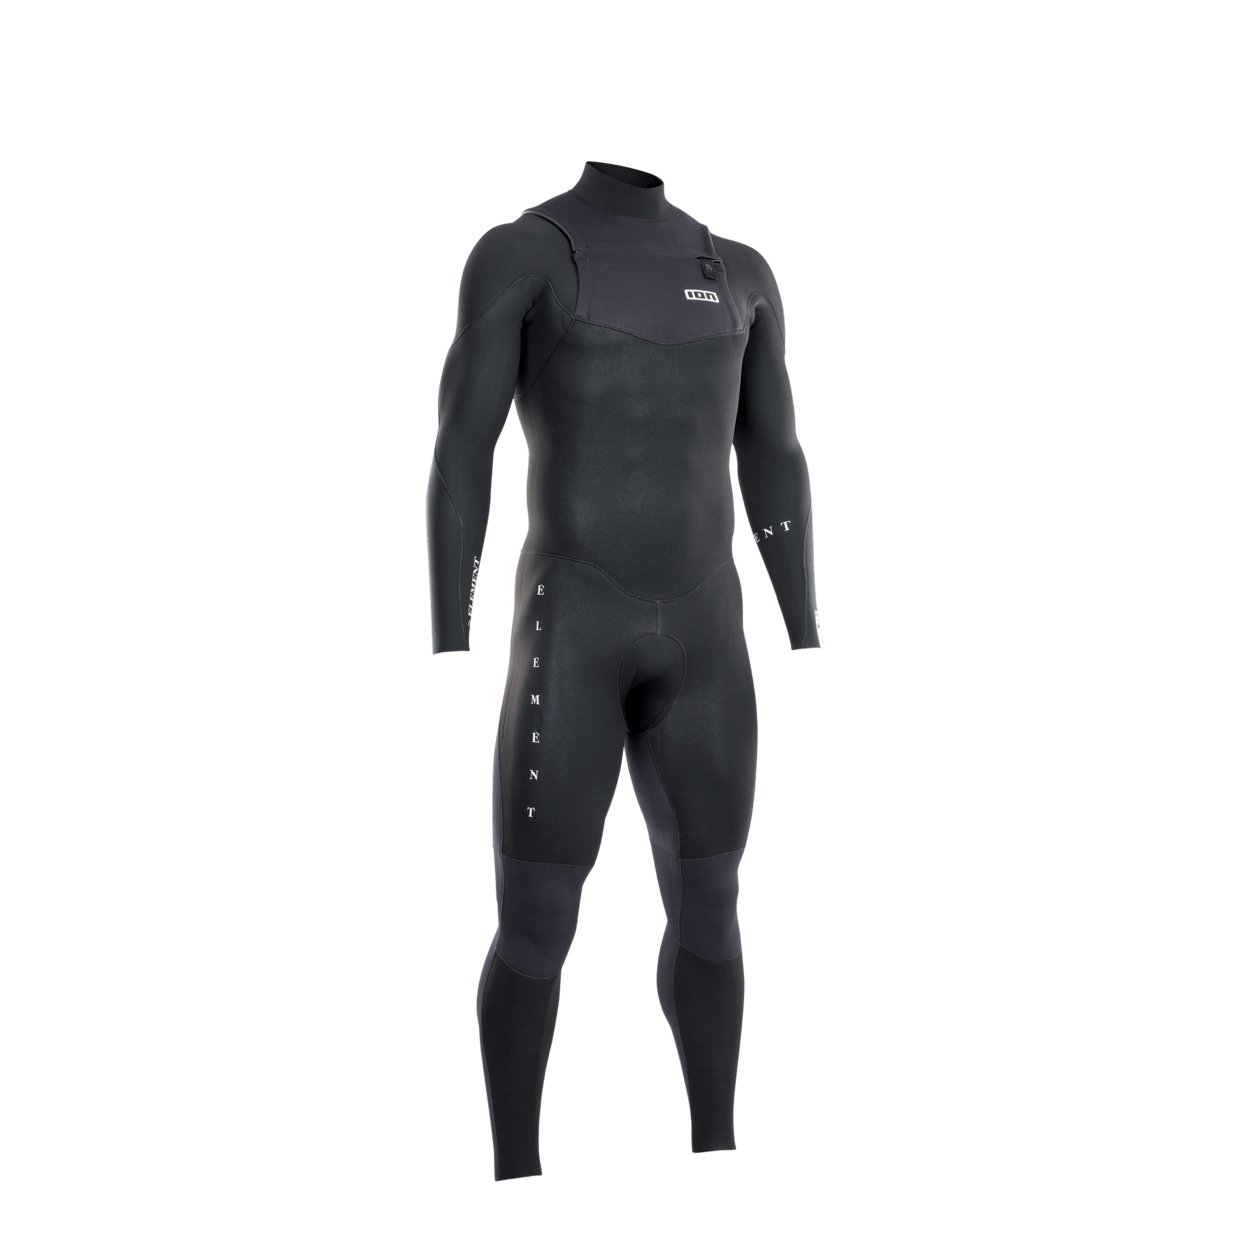 ION Element 5/4 Front Zip 2022 - Worthing Watersports - 9008415950034 - Wetsuits - ION Water